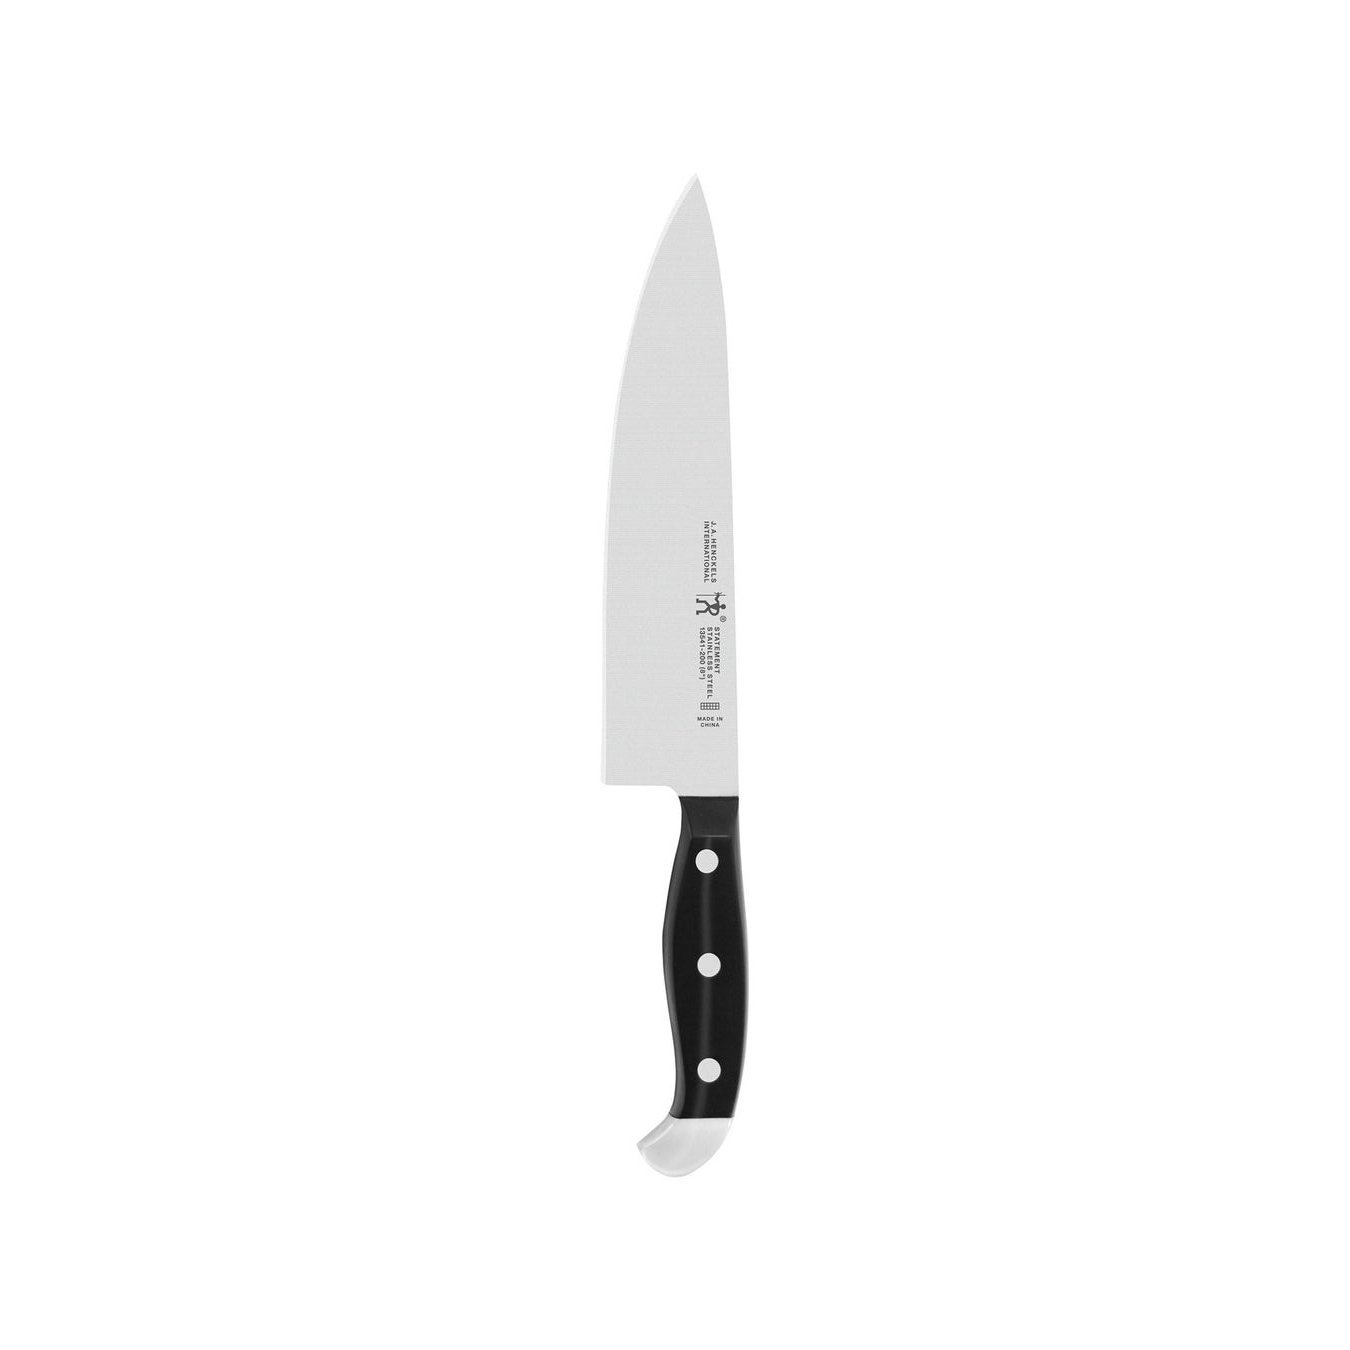 08 - AUTHENTIC: 10 Chef's Knife